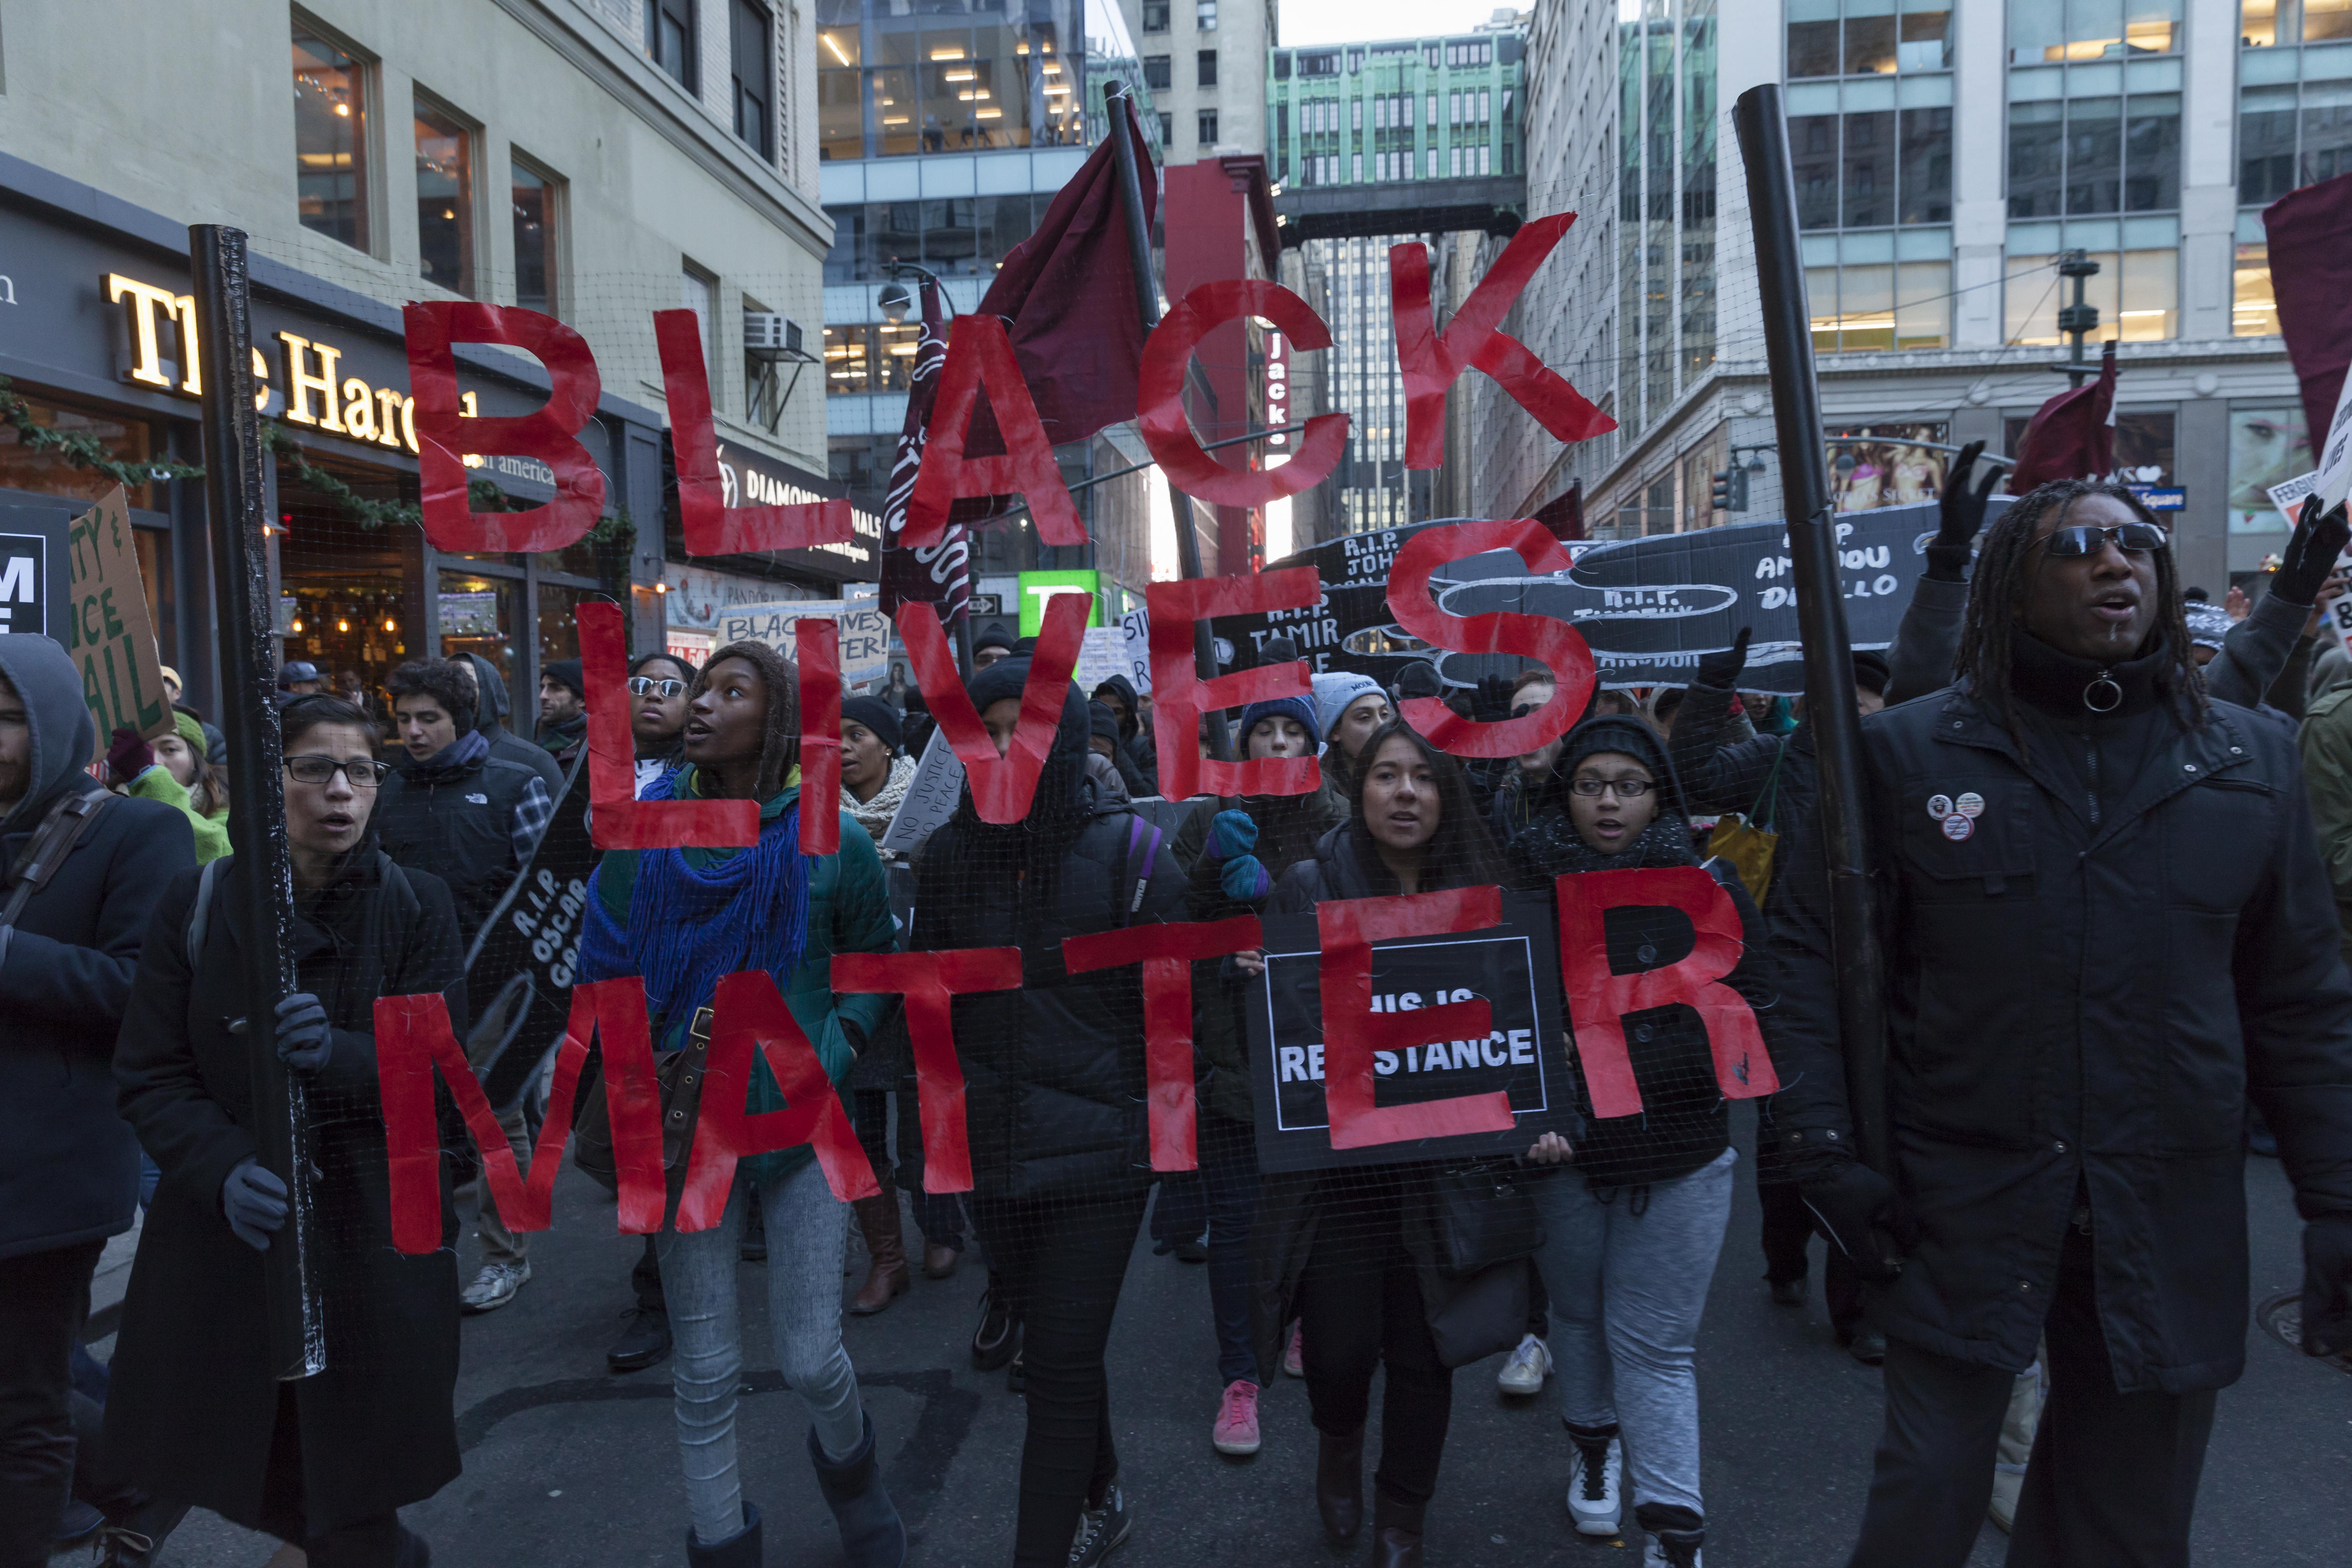 New York, NY USA - December 13, 2014: Protesters march against police brutality and grand jury decision on Eric Garner case on Broadway and 32nd street (Shutterstock)